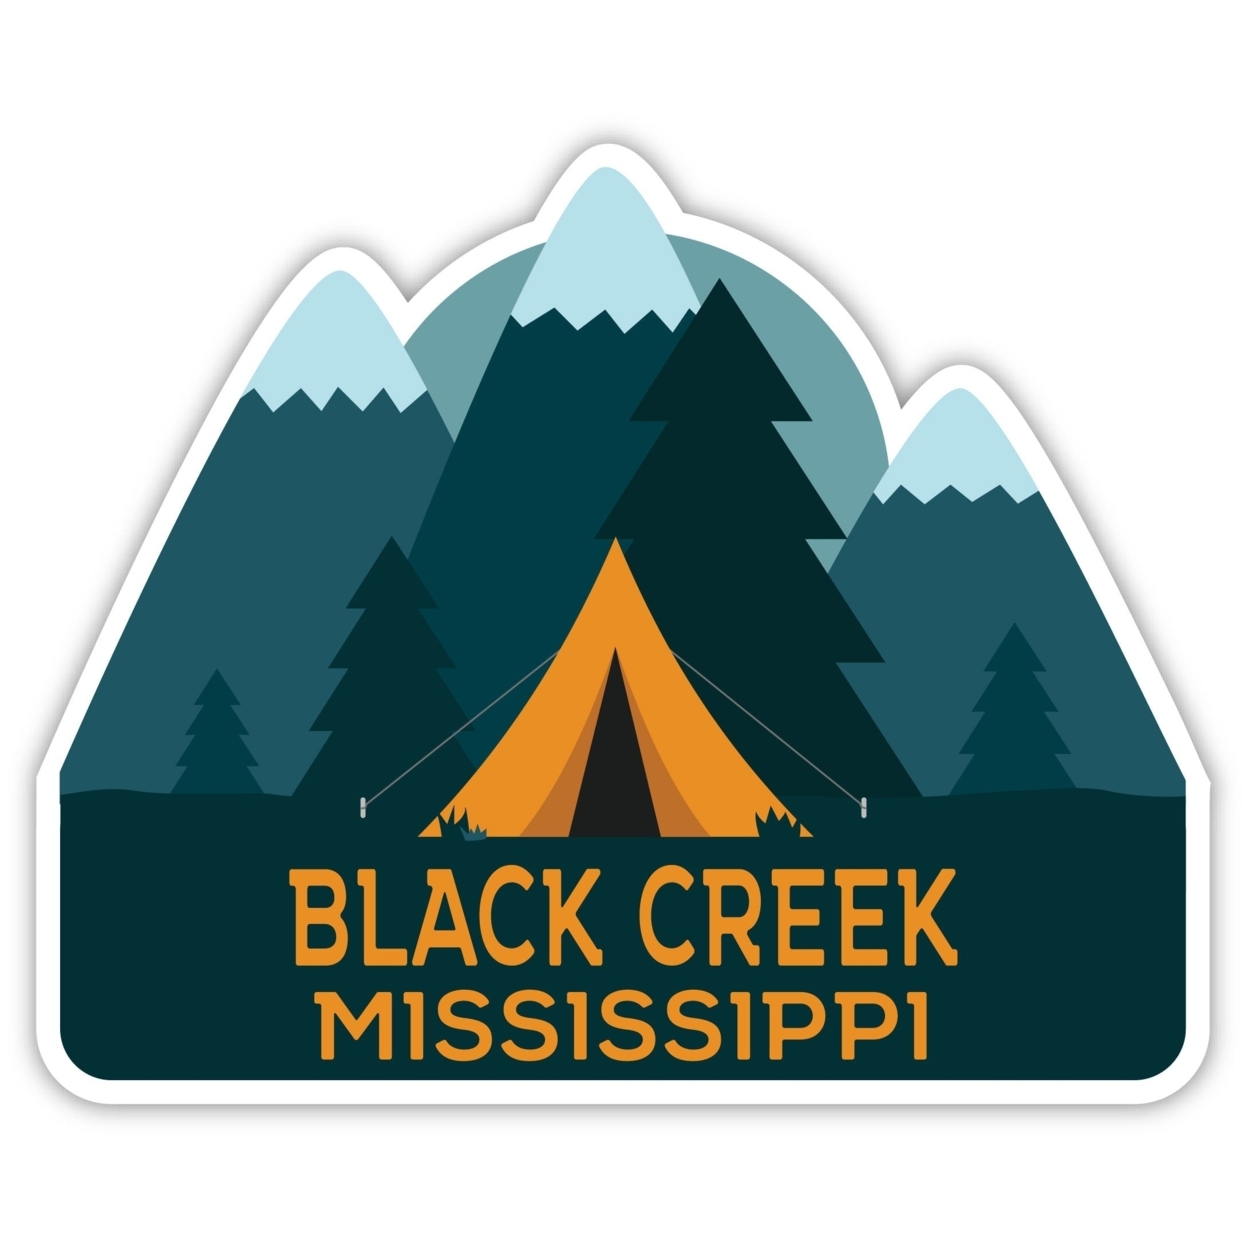 Black Creek Mississippi Souvenir Decorative Stickers (Choose Theme And Size) - 4-Pack, 2-Inch, Tent